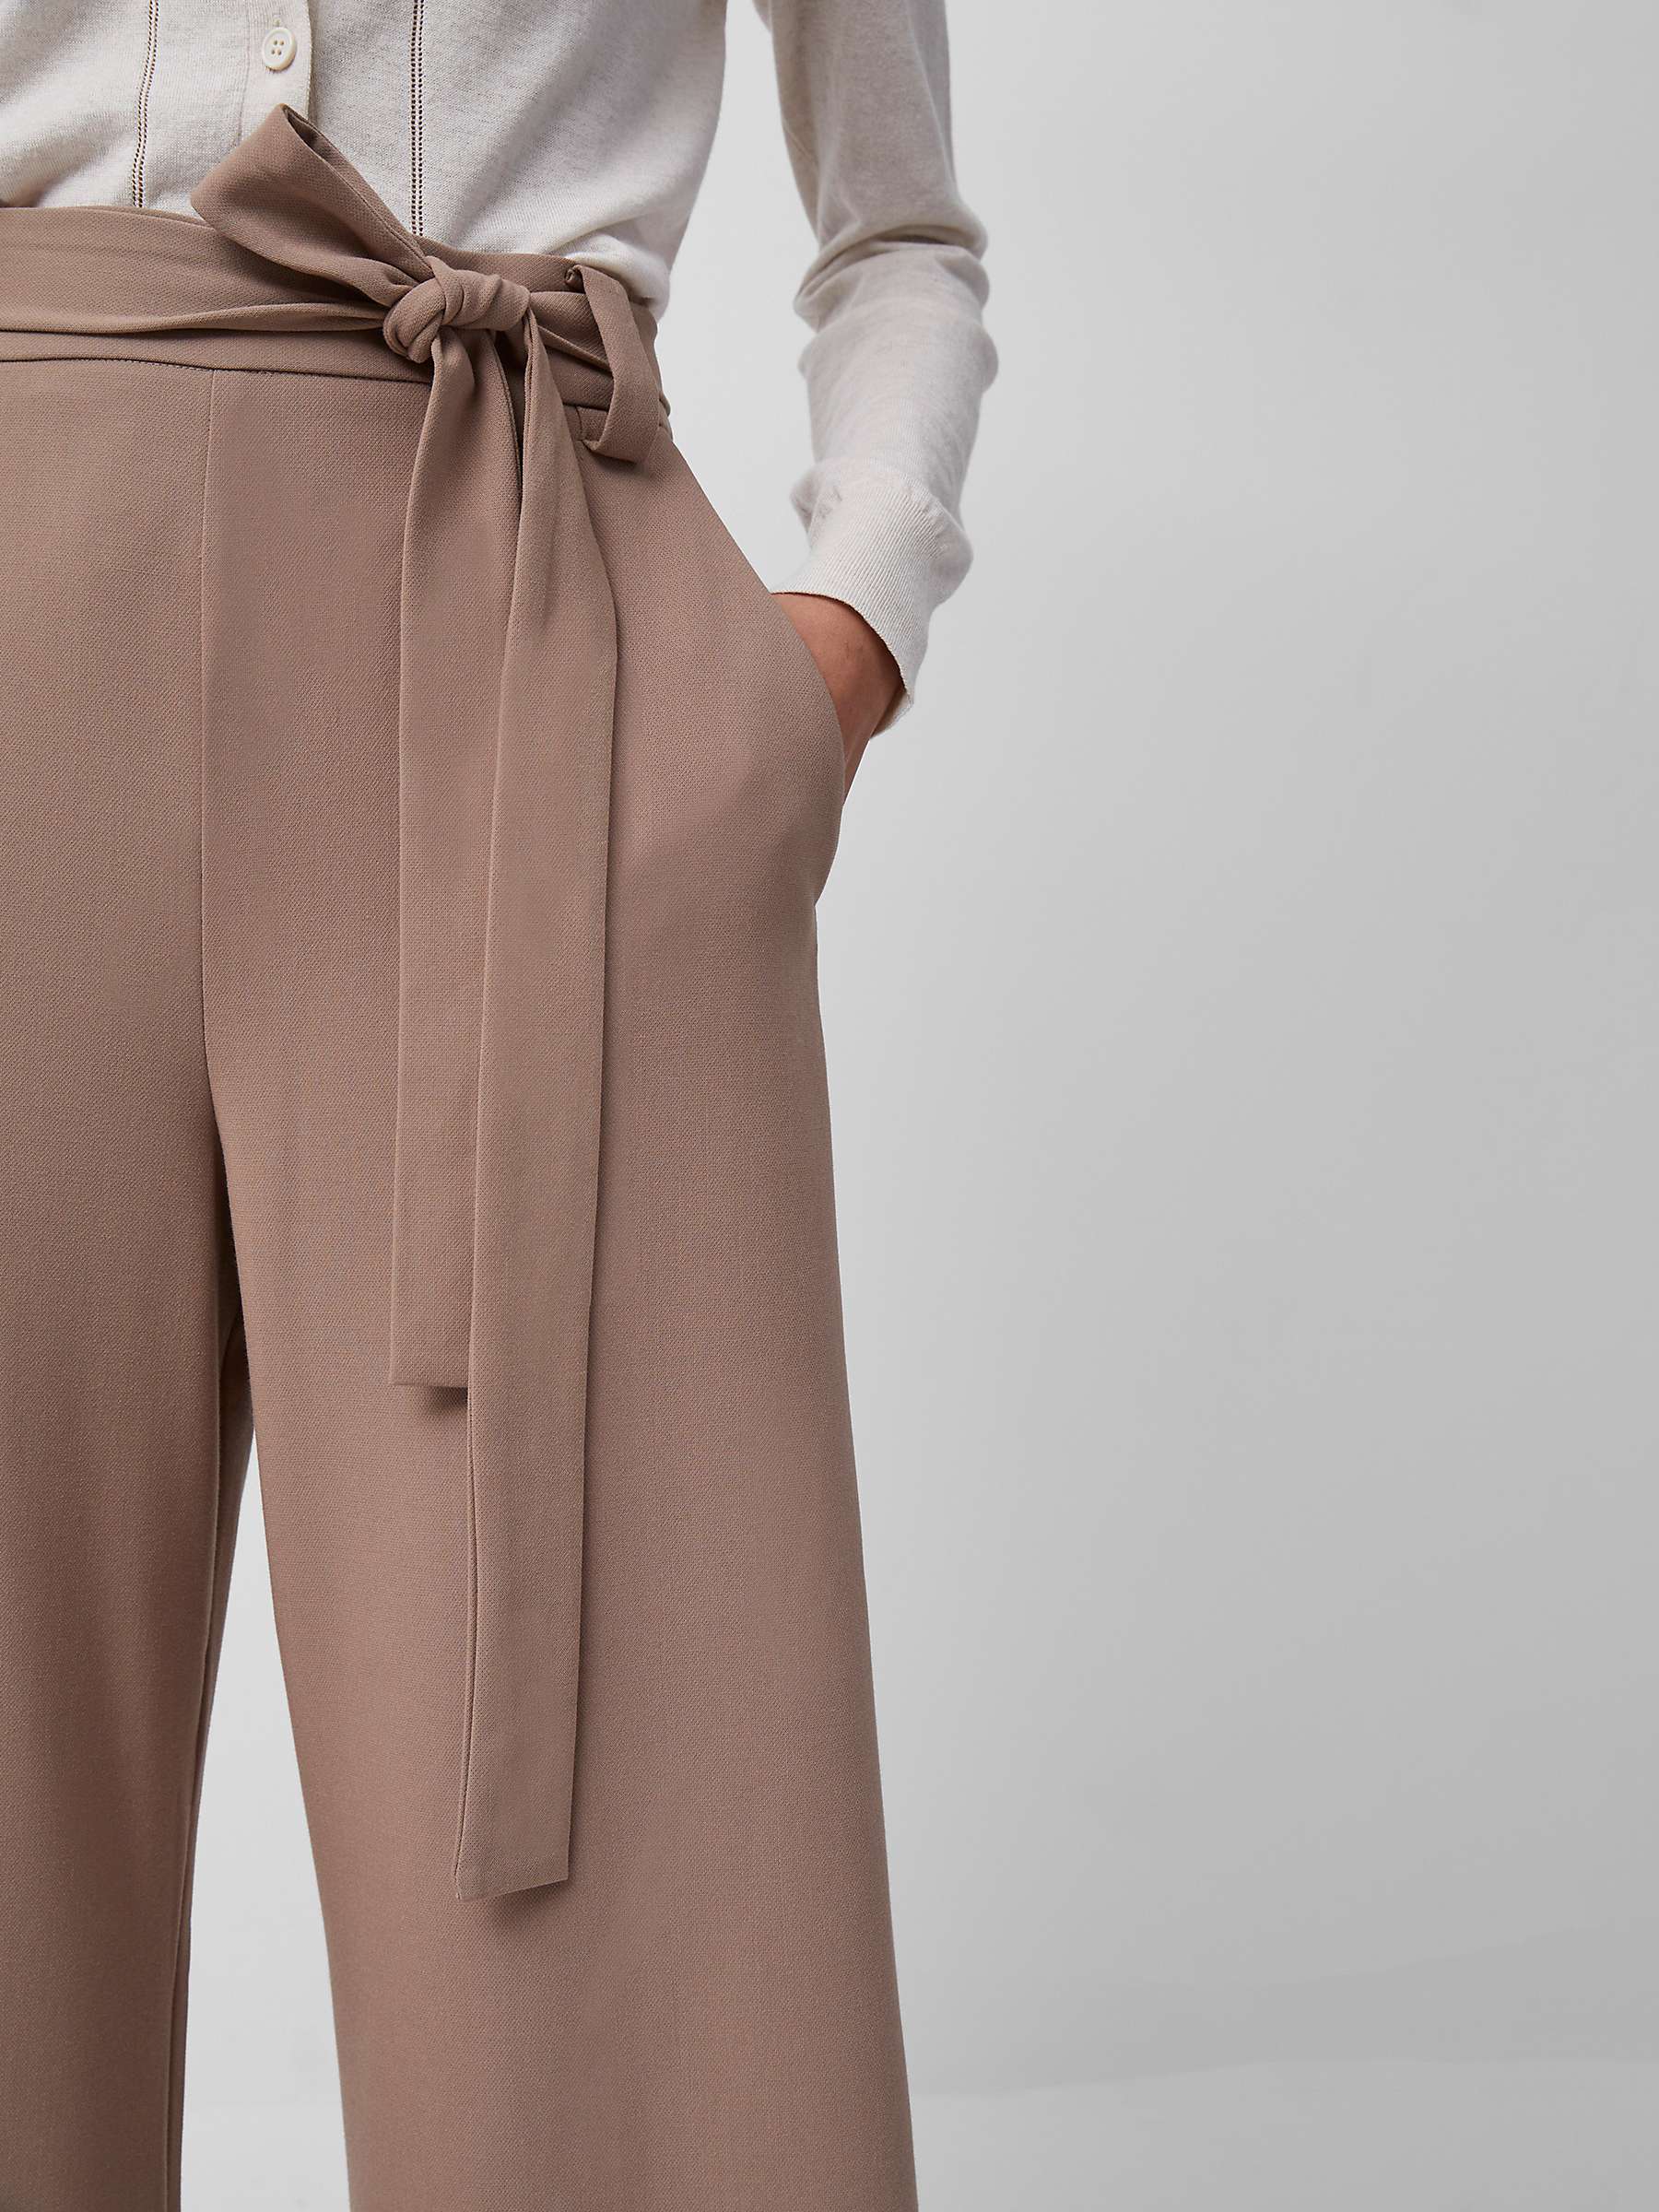 Buy French Connection Whisper Belted Culottes Online at johnlewis.com